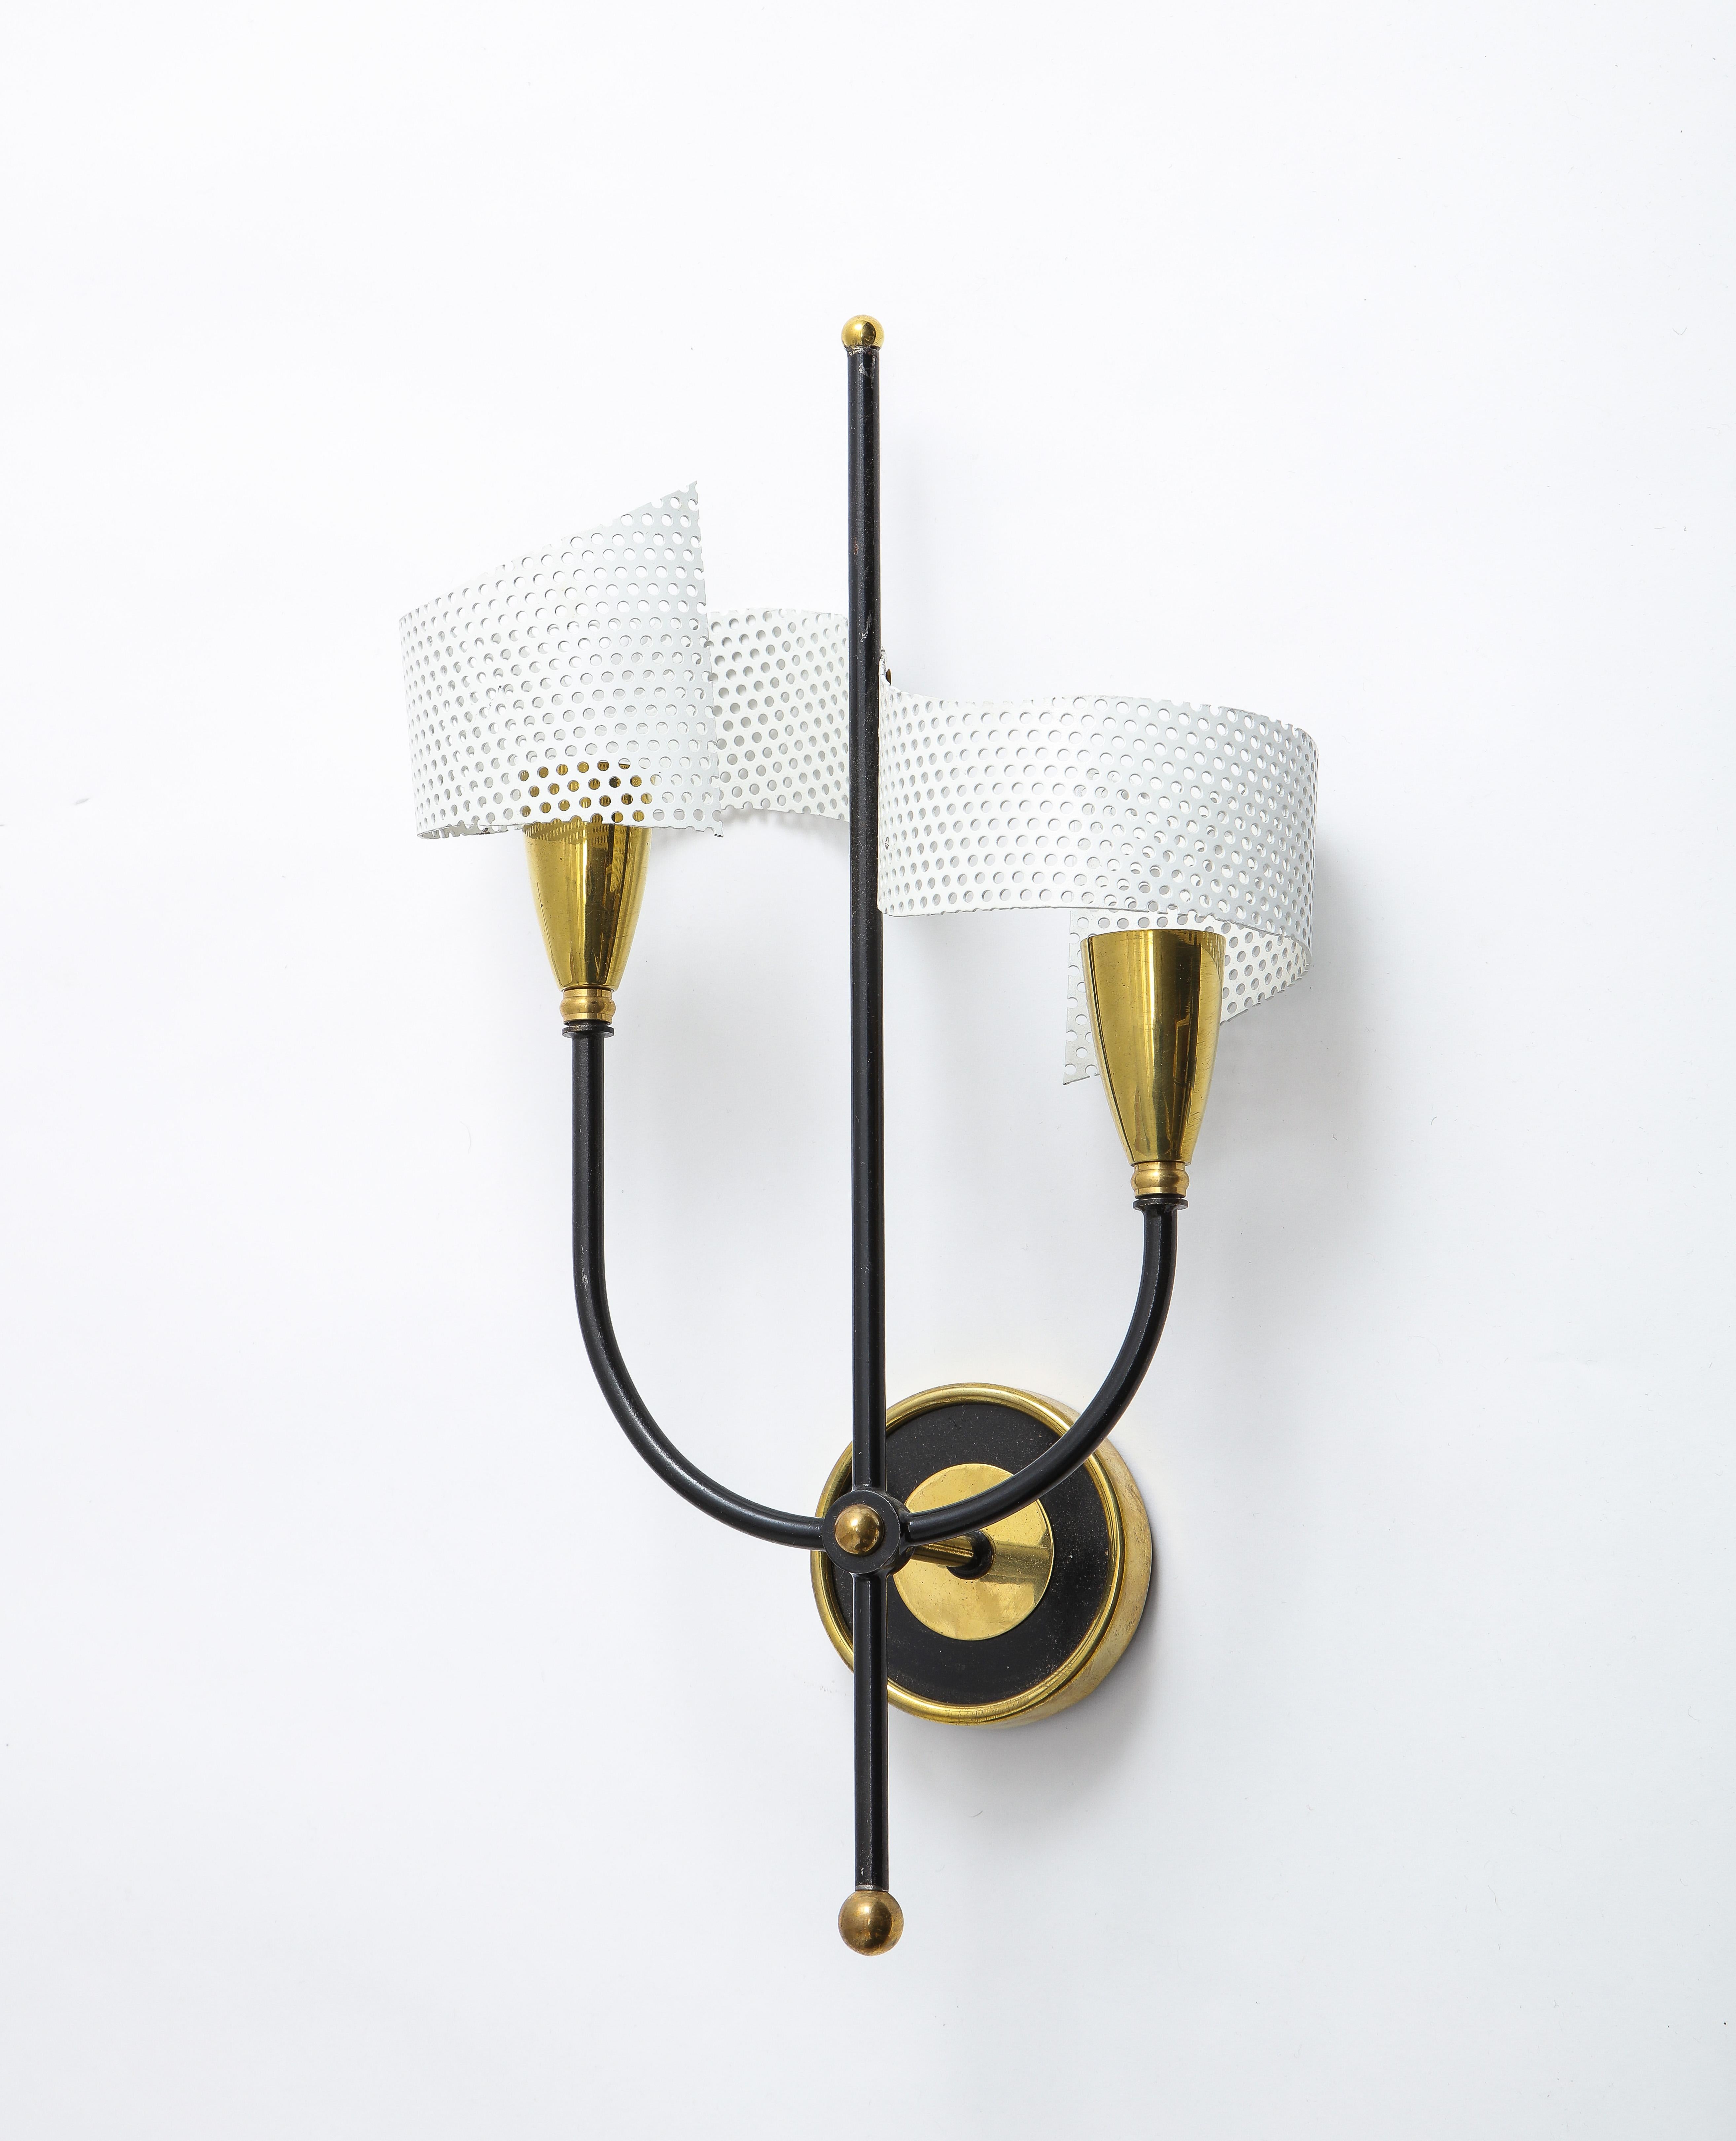 Aluminum Pair of Scrolled Sconces in Brass and Aluminium by Mathieu, France, 1950s For Sale